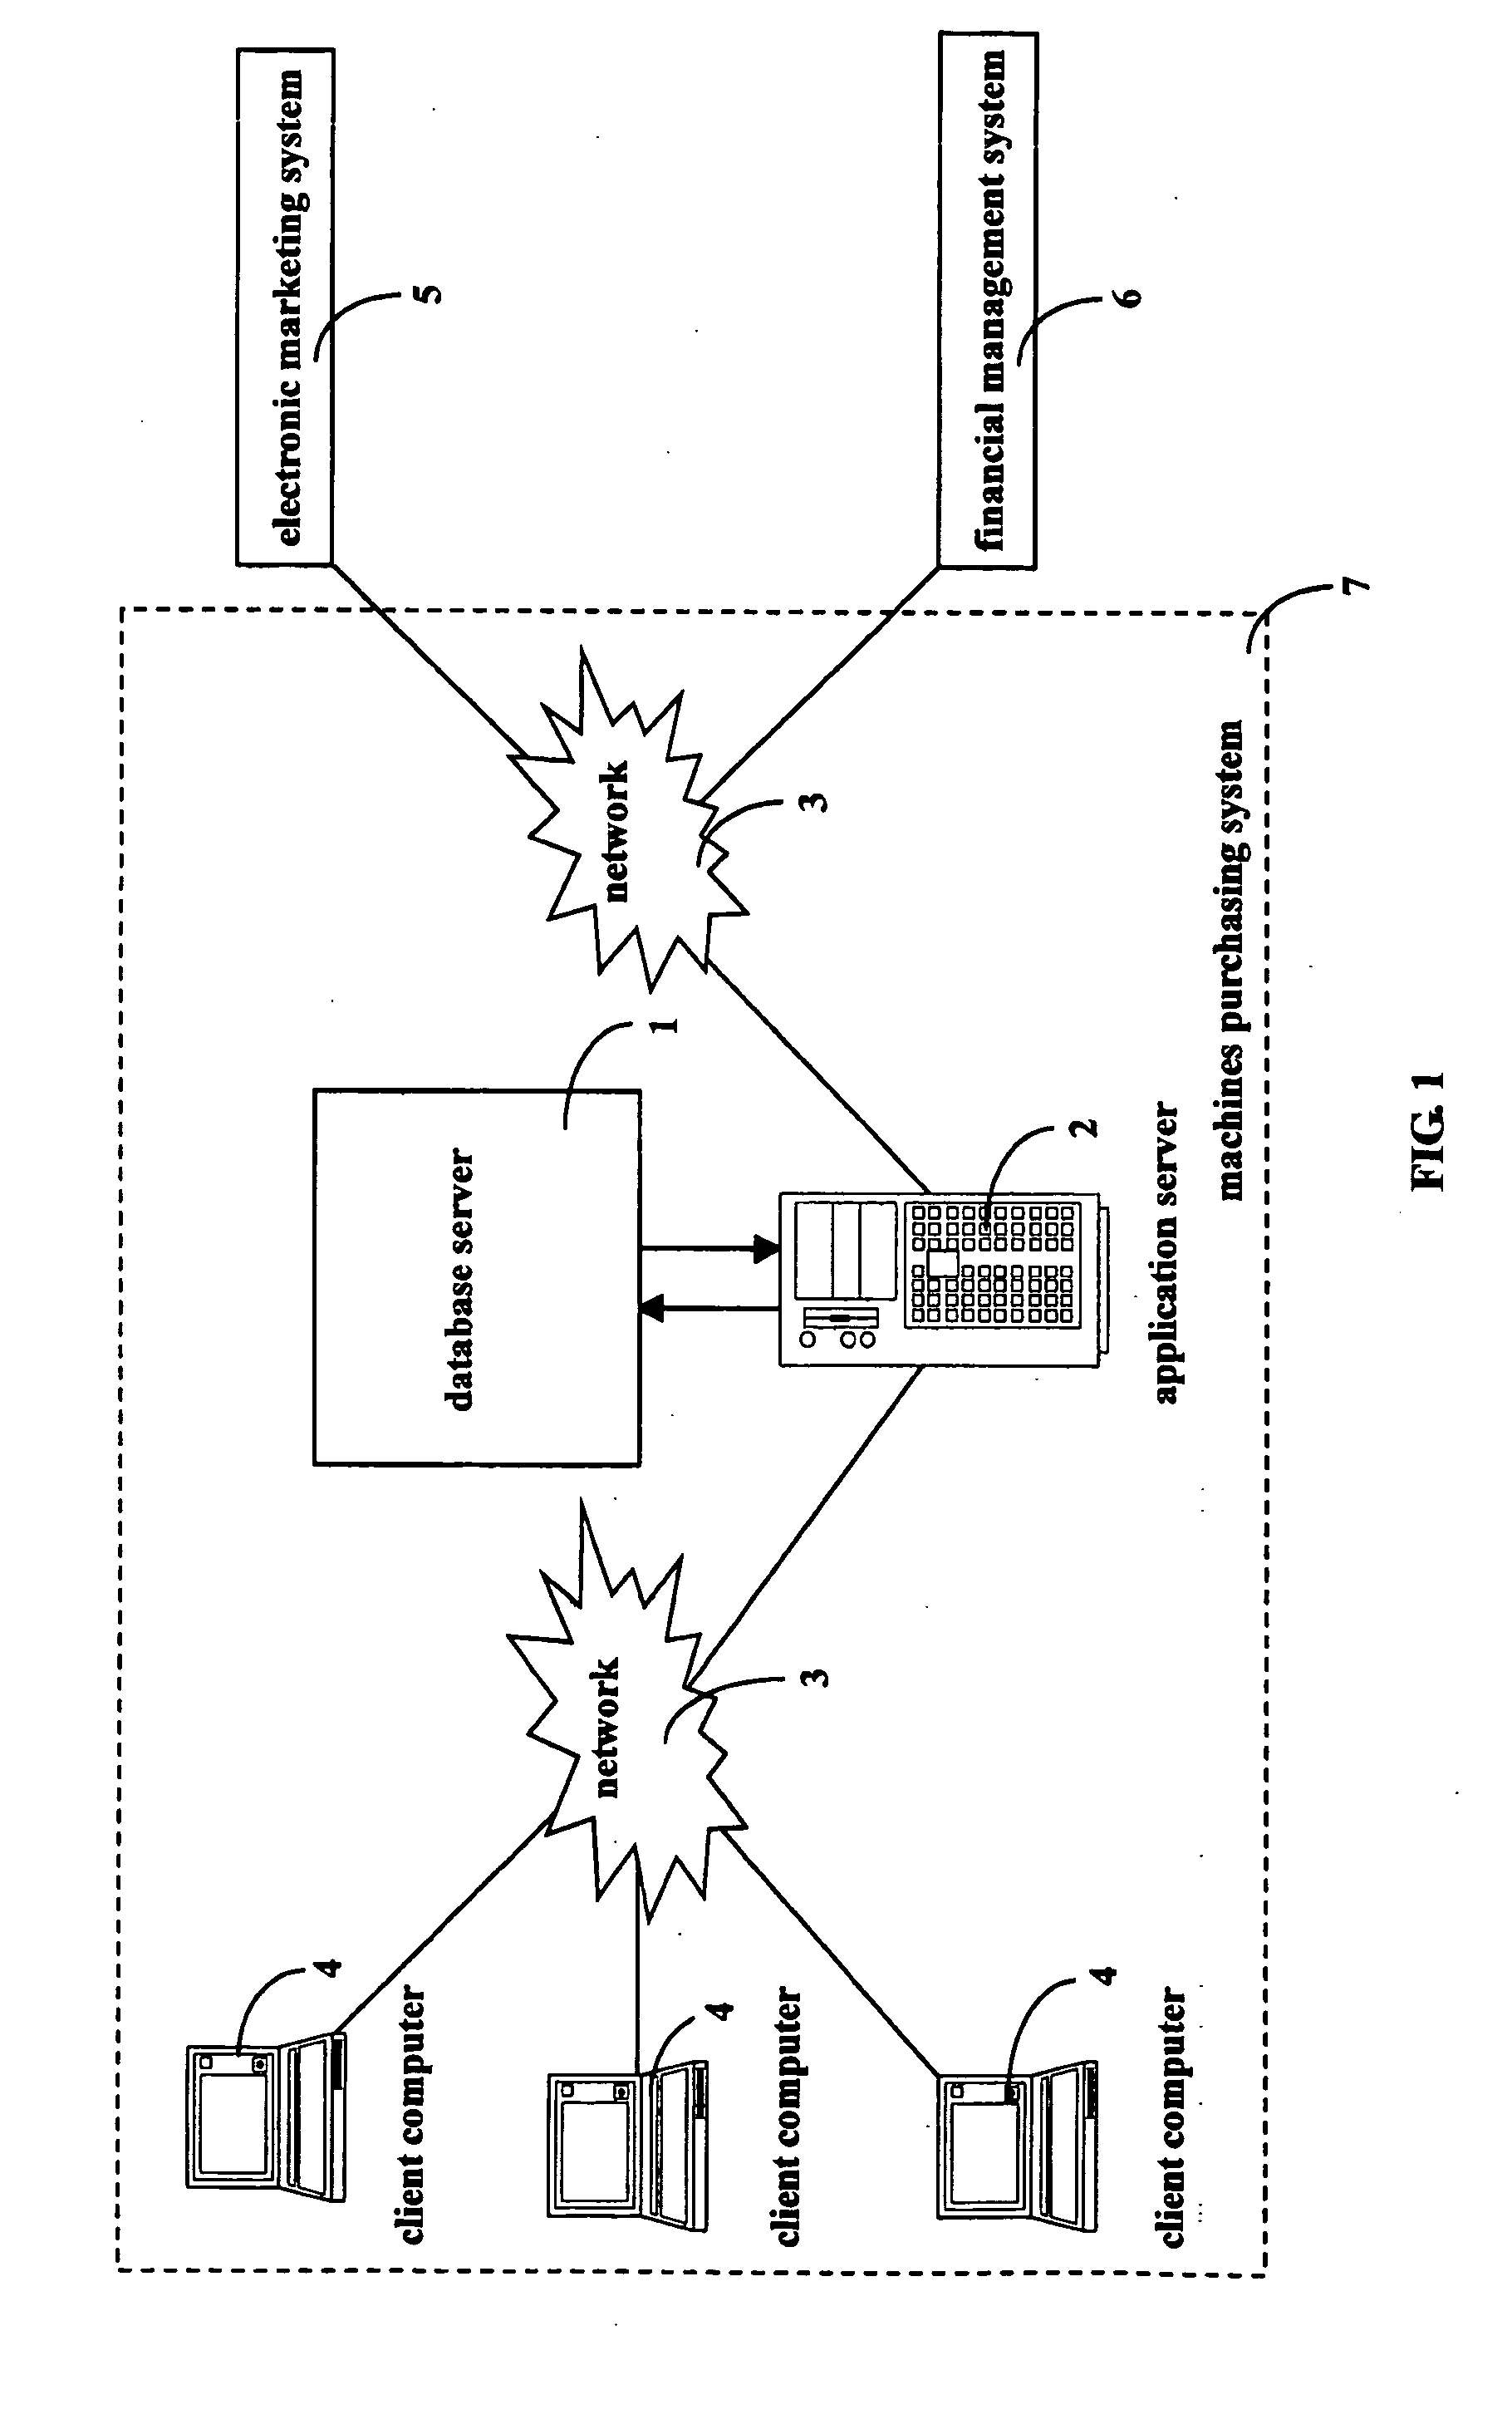 Machine purchasing system and method